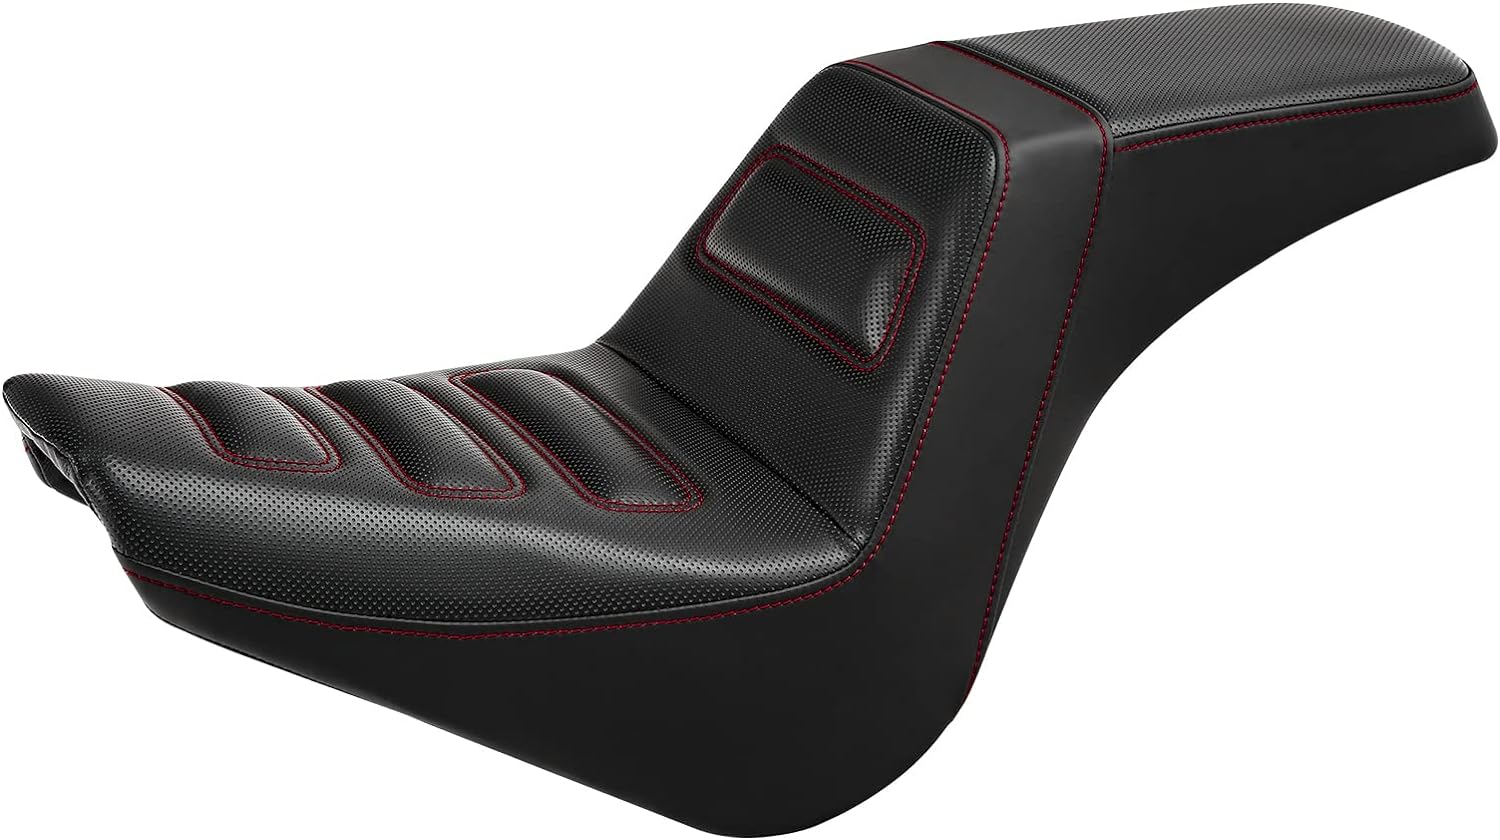 Driver Passenger Two-up Seat Fit For Harley Street Bob FXBB 2018-UP, Black - Harley Street Bob FXBB Two-up Seat Review